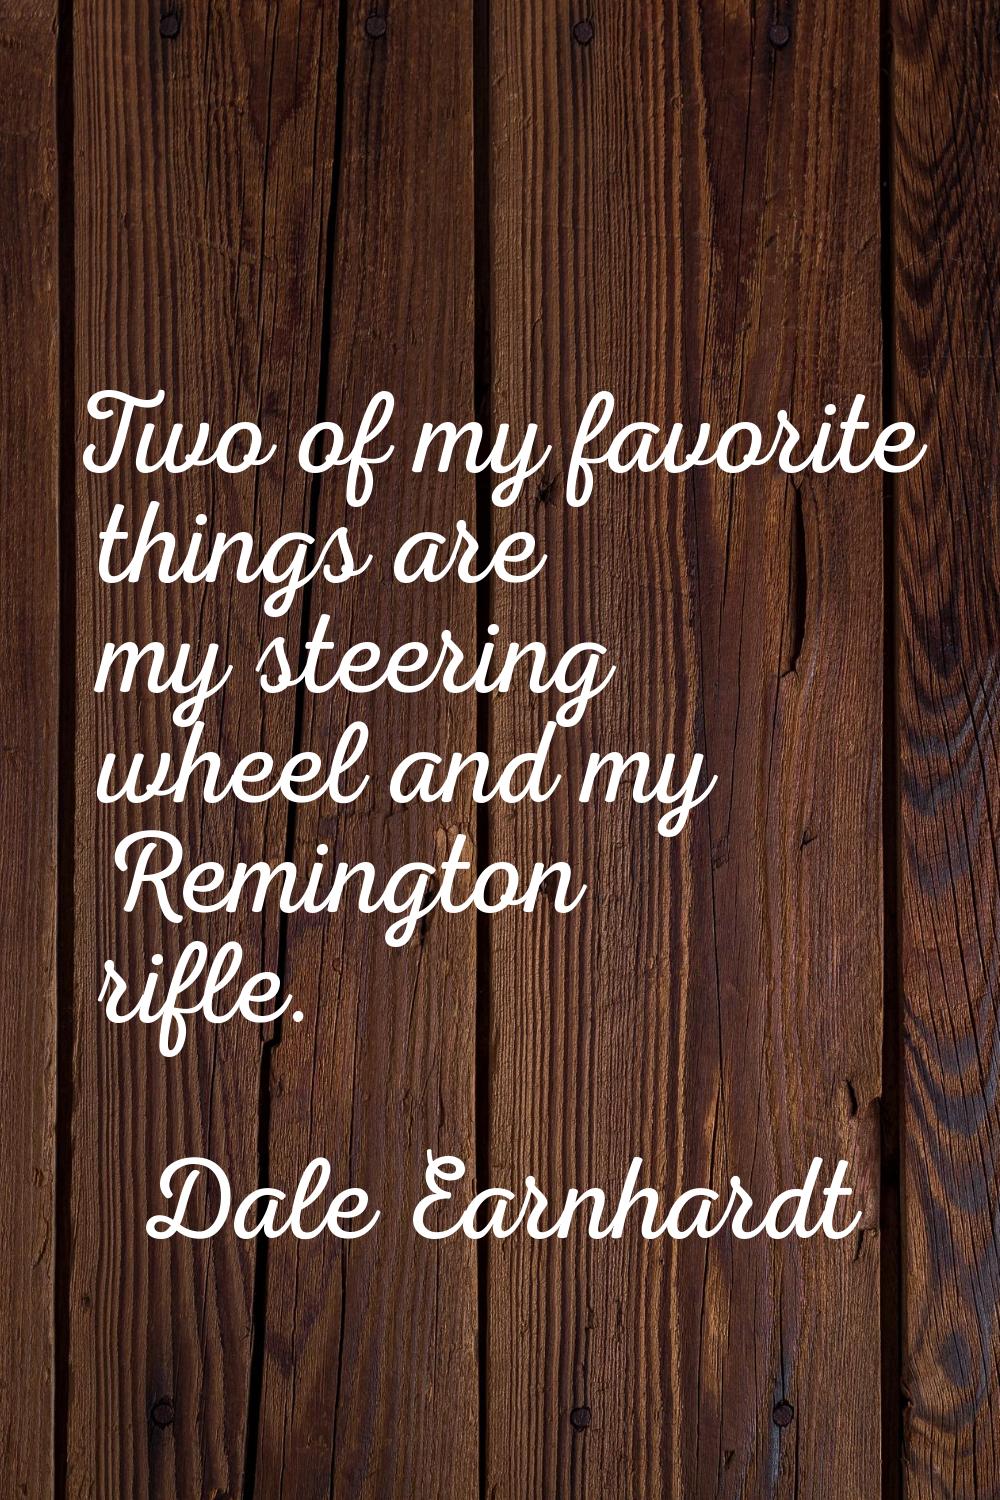 Two of my favorite things are my steering wheel and my Remington rifle.